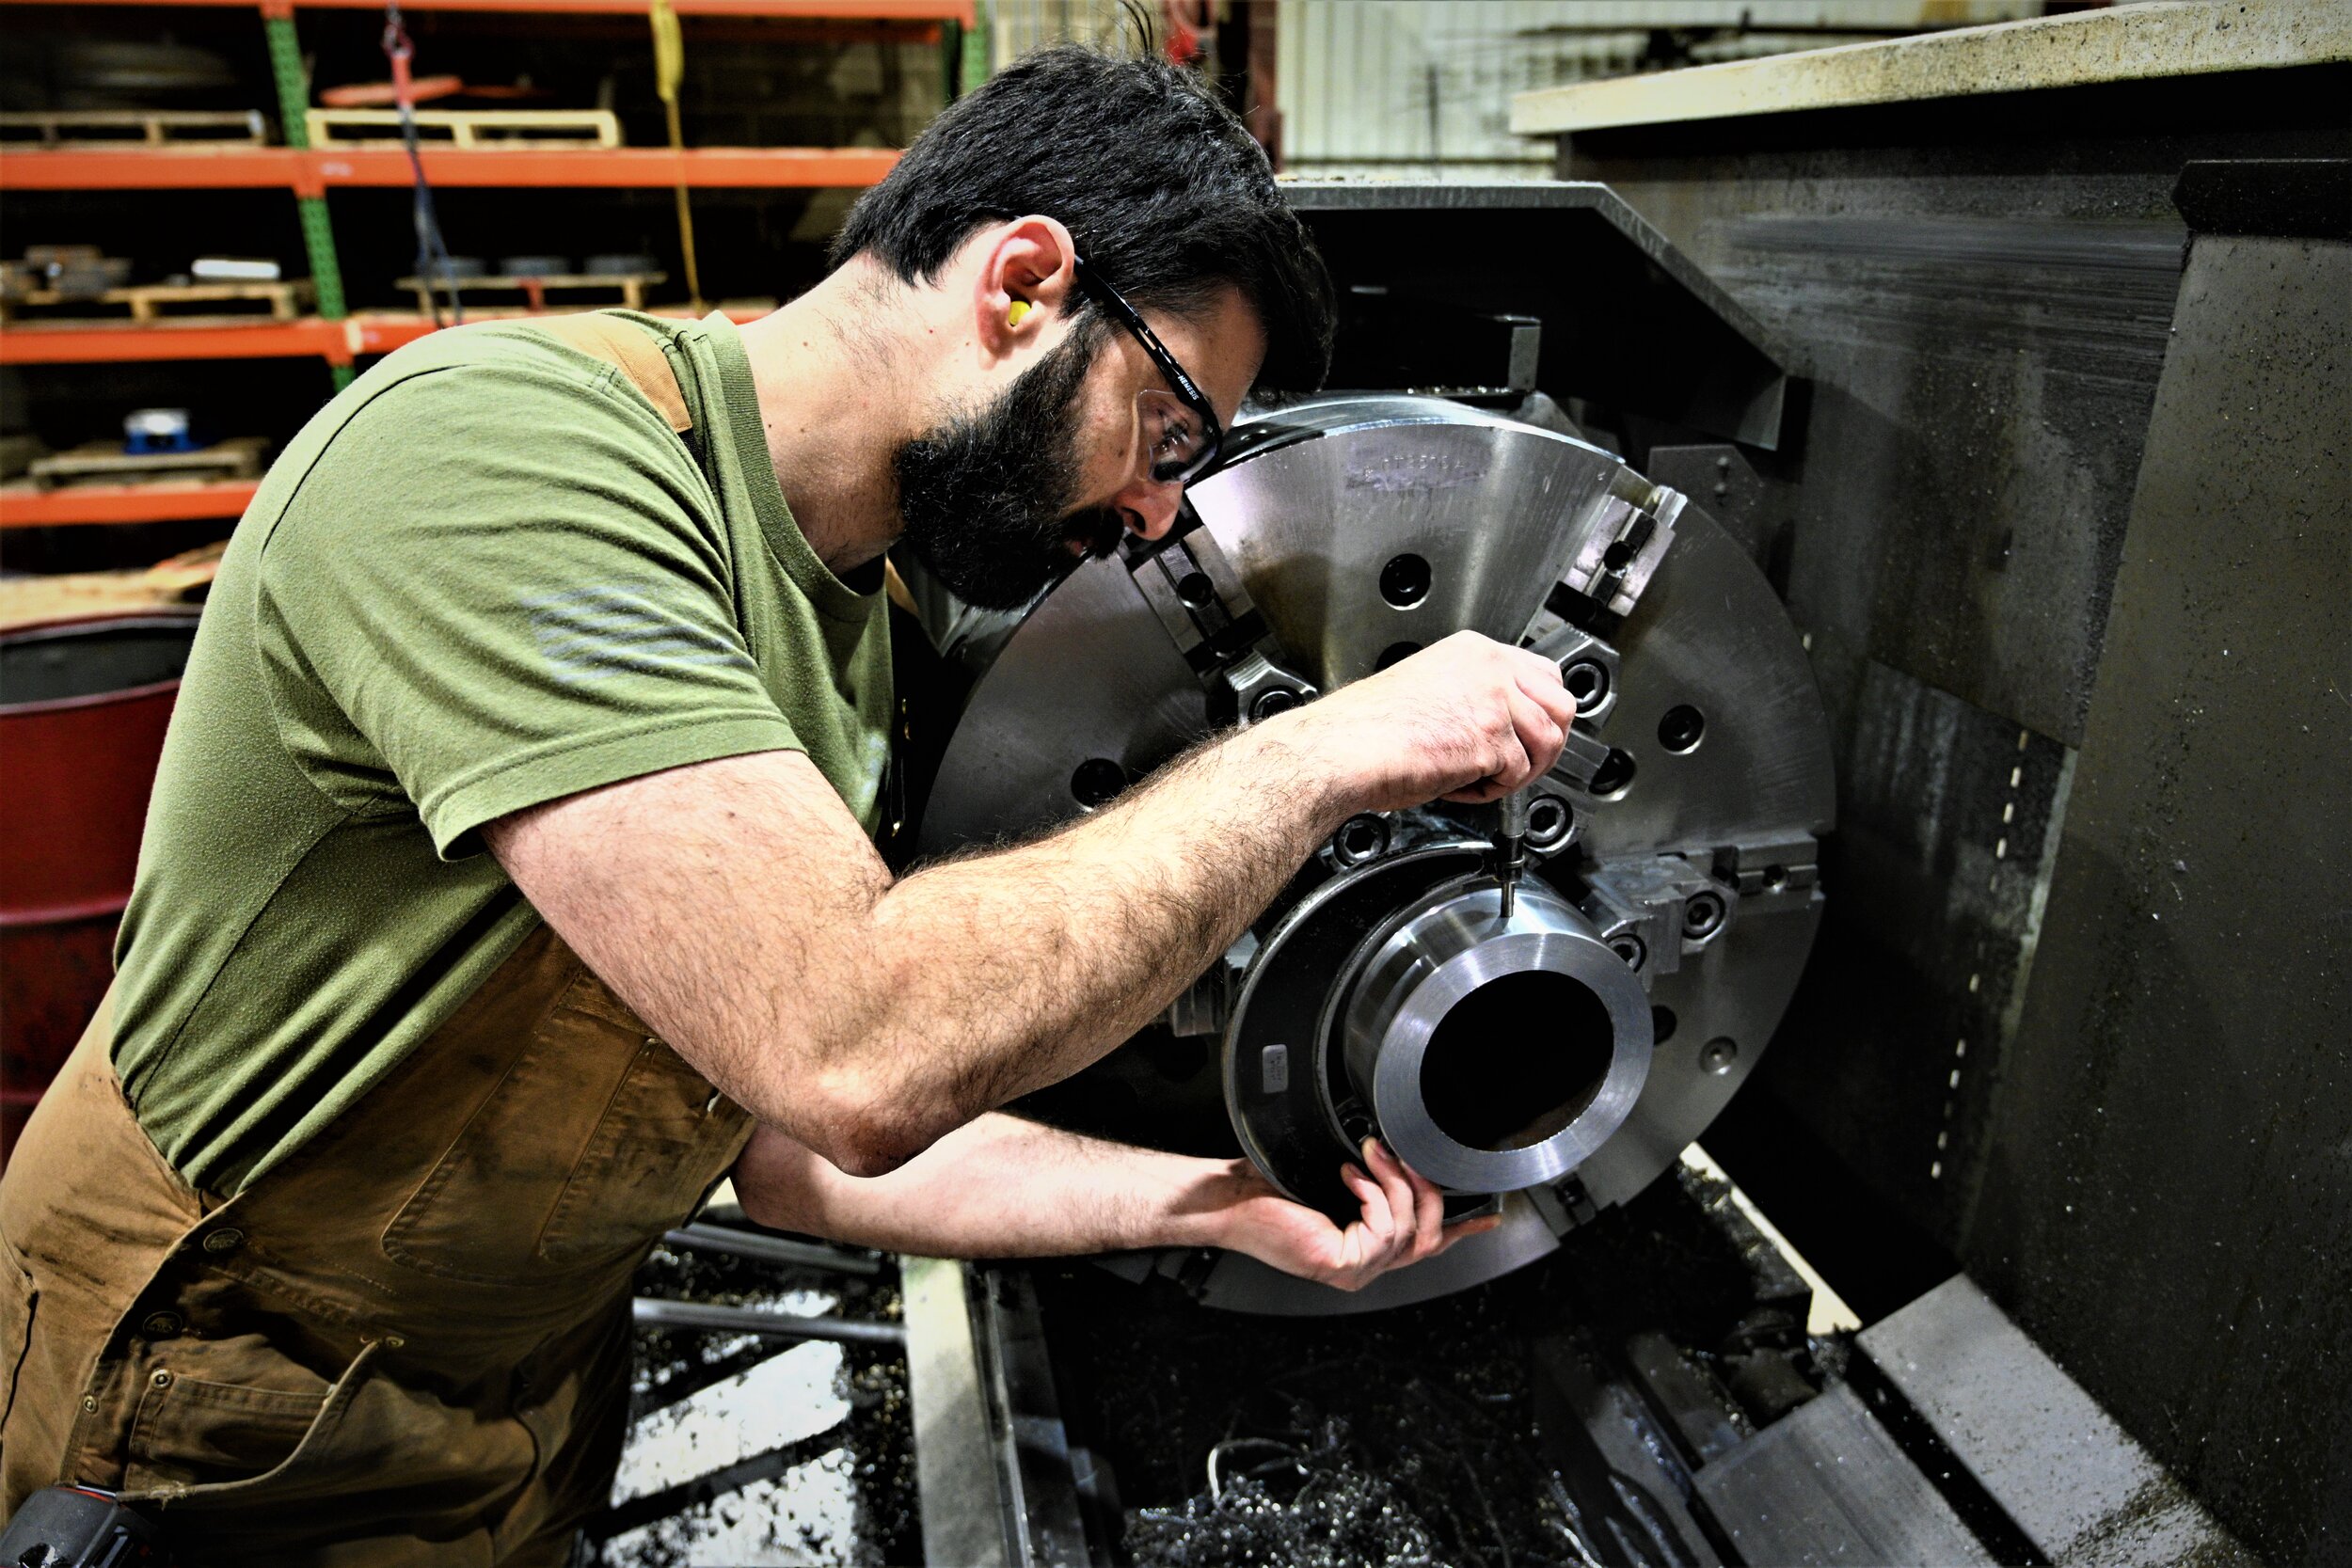   “Fisher Industries believed in me and my work ethic from day one which has opened many doors for myself in the workplace.”  -Amir Falsafi, GSS Machine Shop Foreman 